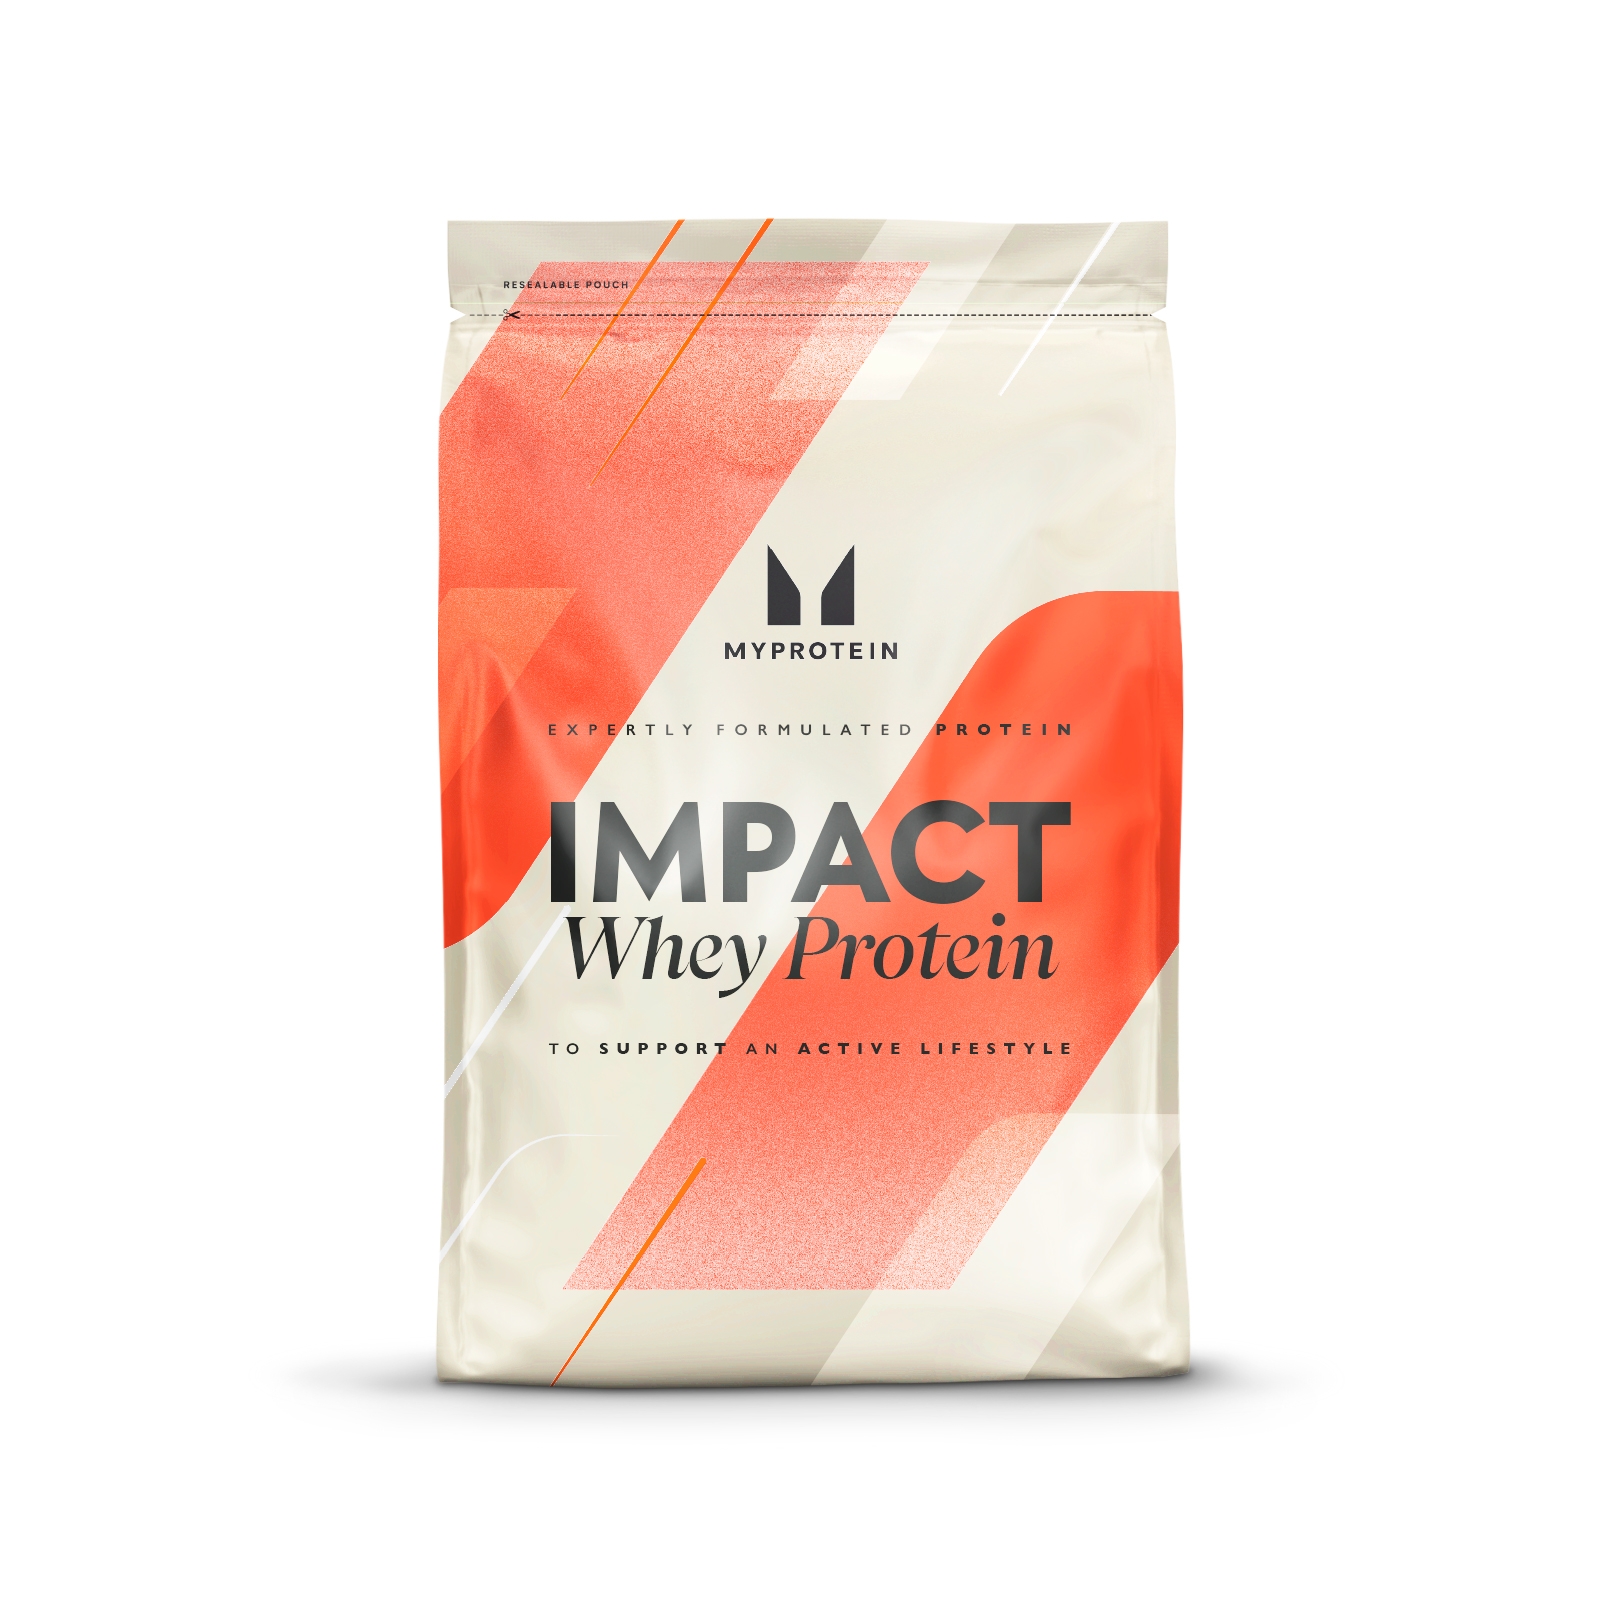 Image of Myprotein Impact Whey Protein - 25kg - Chocolate Brownie 12309353 PT21